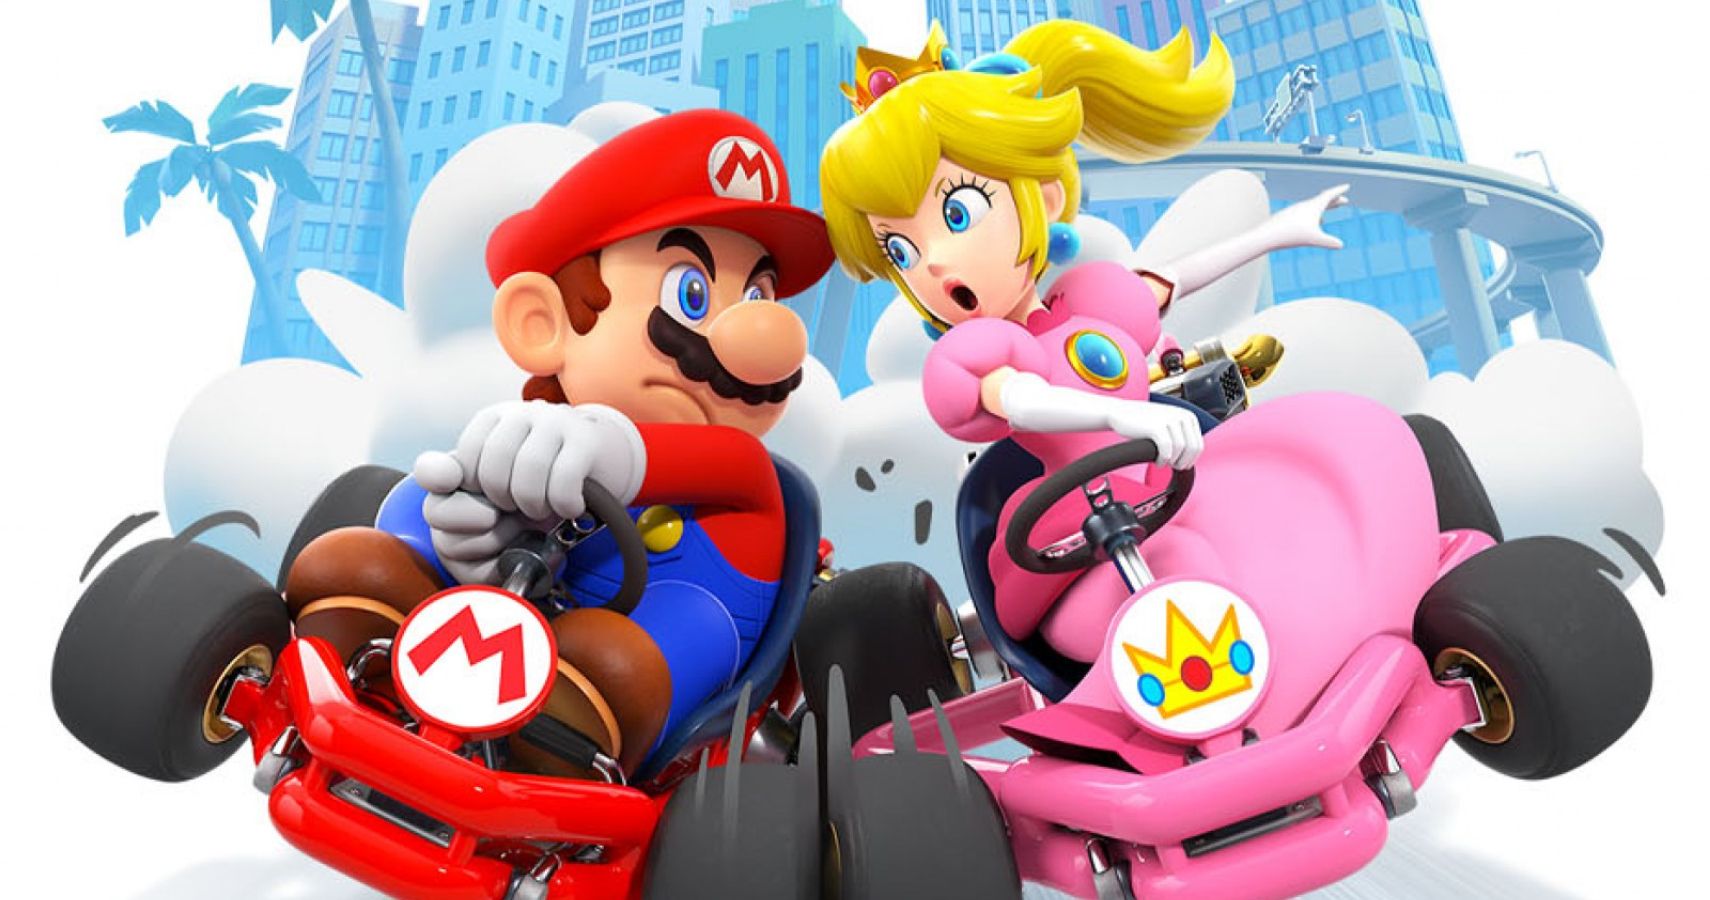 Data Shows Most Mario Kart Players Will Do Anything To Win, Even If